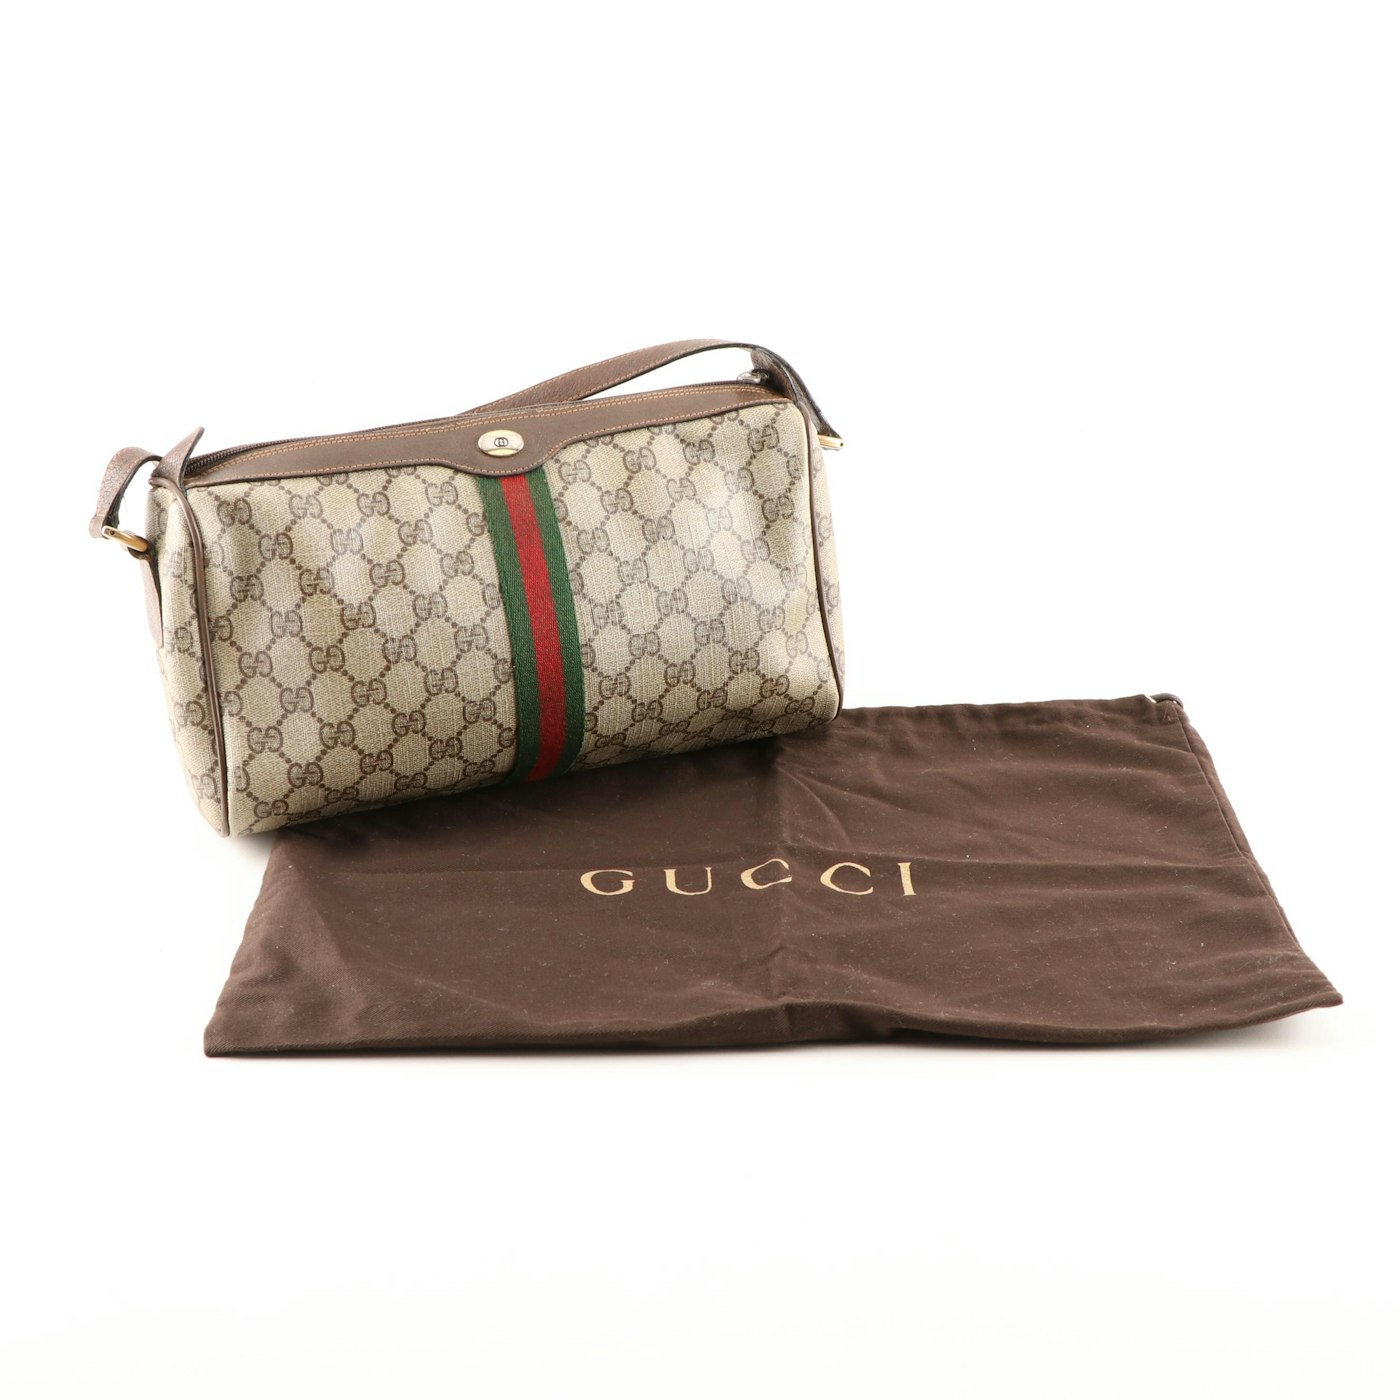 Gucci Accessory Collection Coated Canvas and Leather Web Stripe Crossbody Bag | EBTH